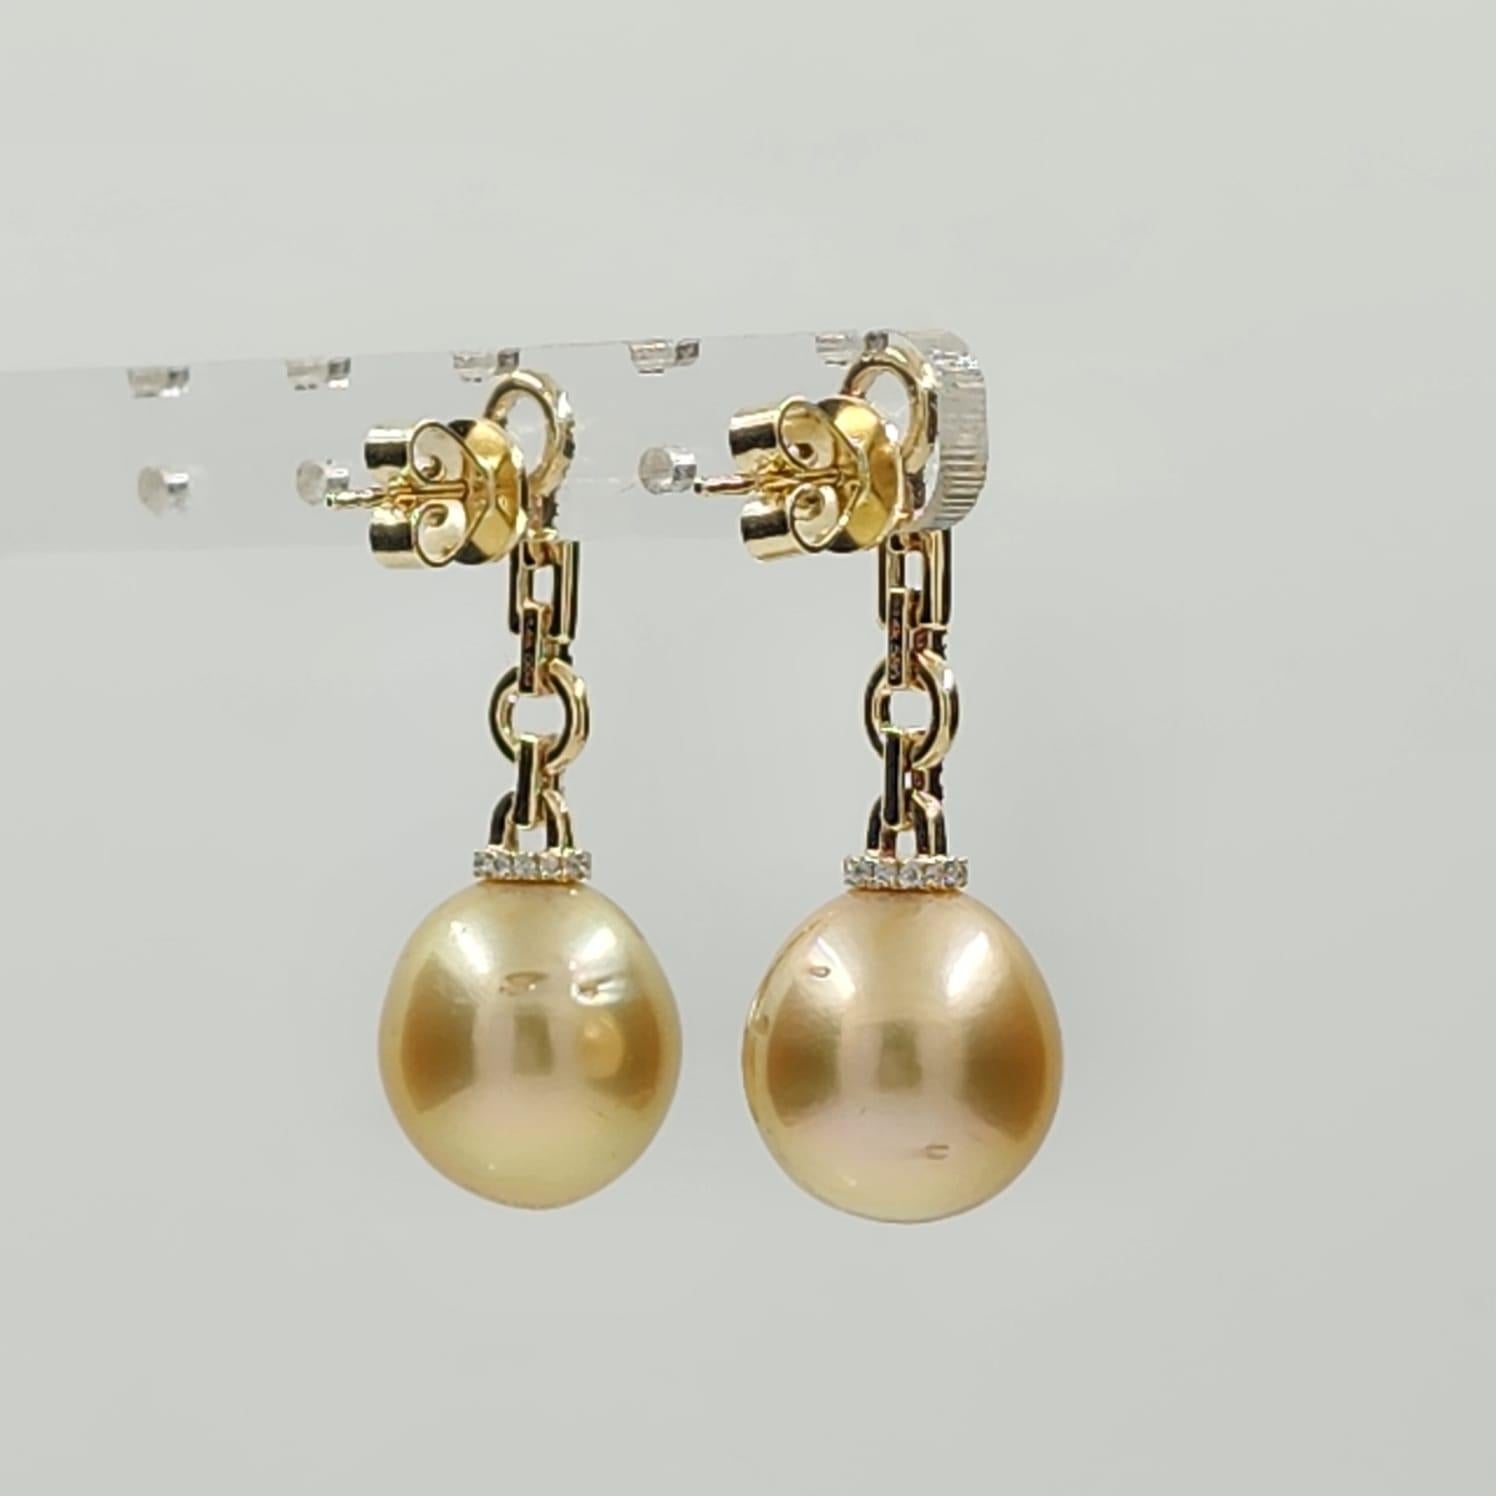 12.5 x 14mm Oval South Sea Pearl Diamond Dangle Earrings in 14 Karat Yellow Gold In New Condition For Sale In Hong Kong, HK